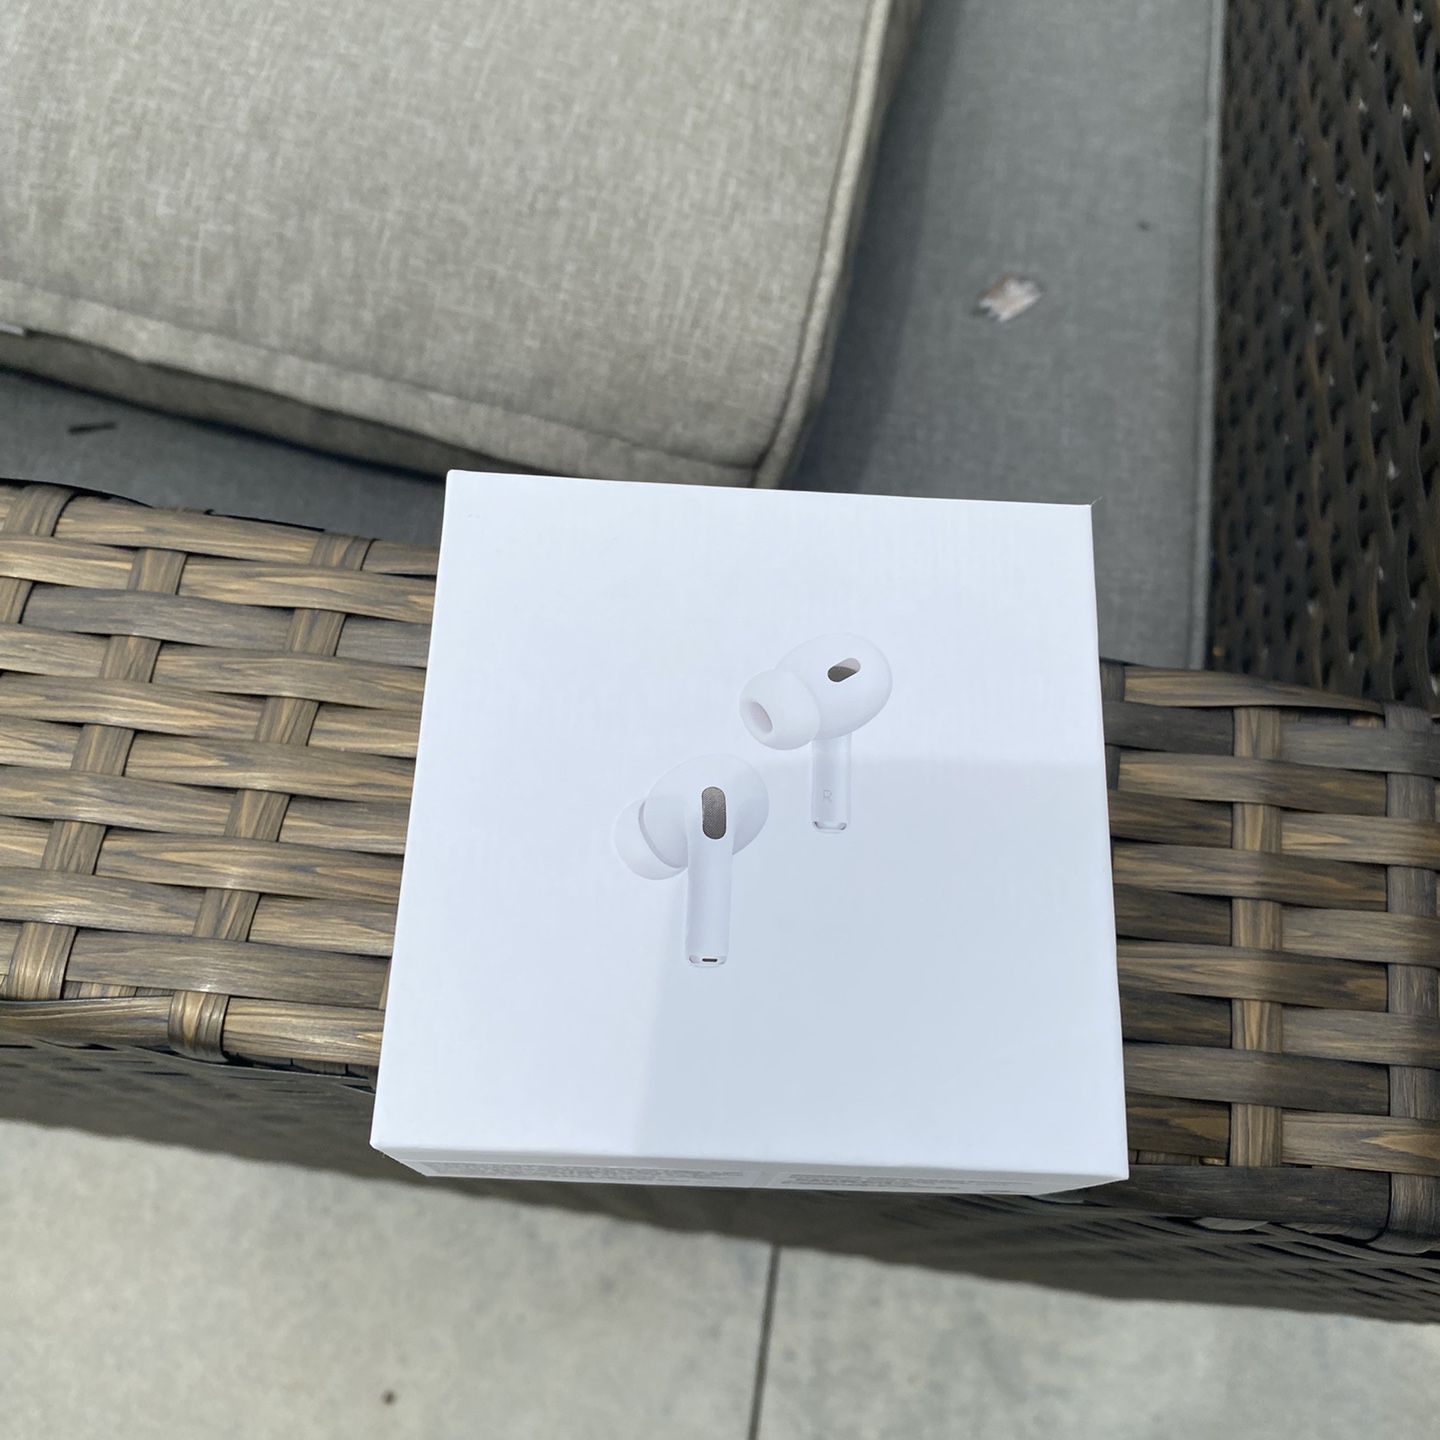 Brand New Airpod Gen 2 (Selling Because I Got The Headphone Maxs)